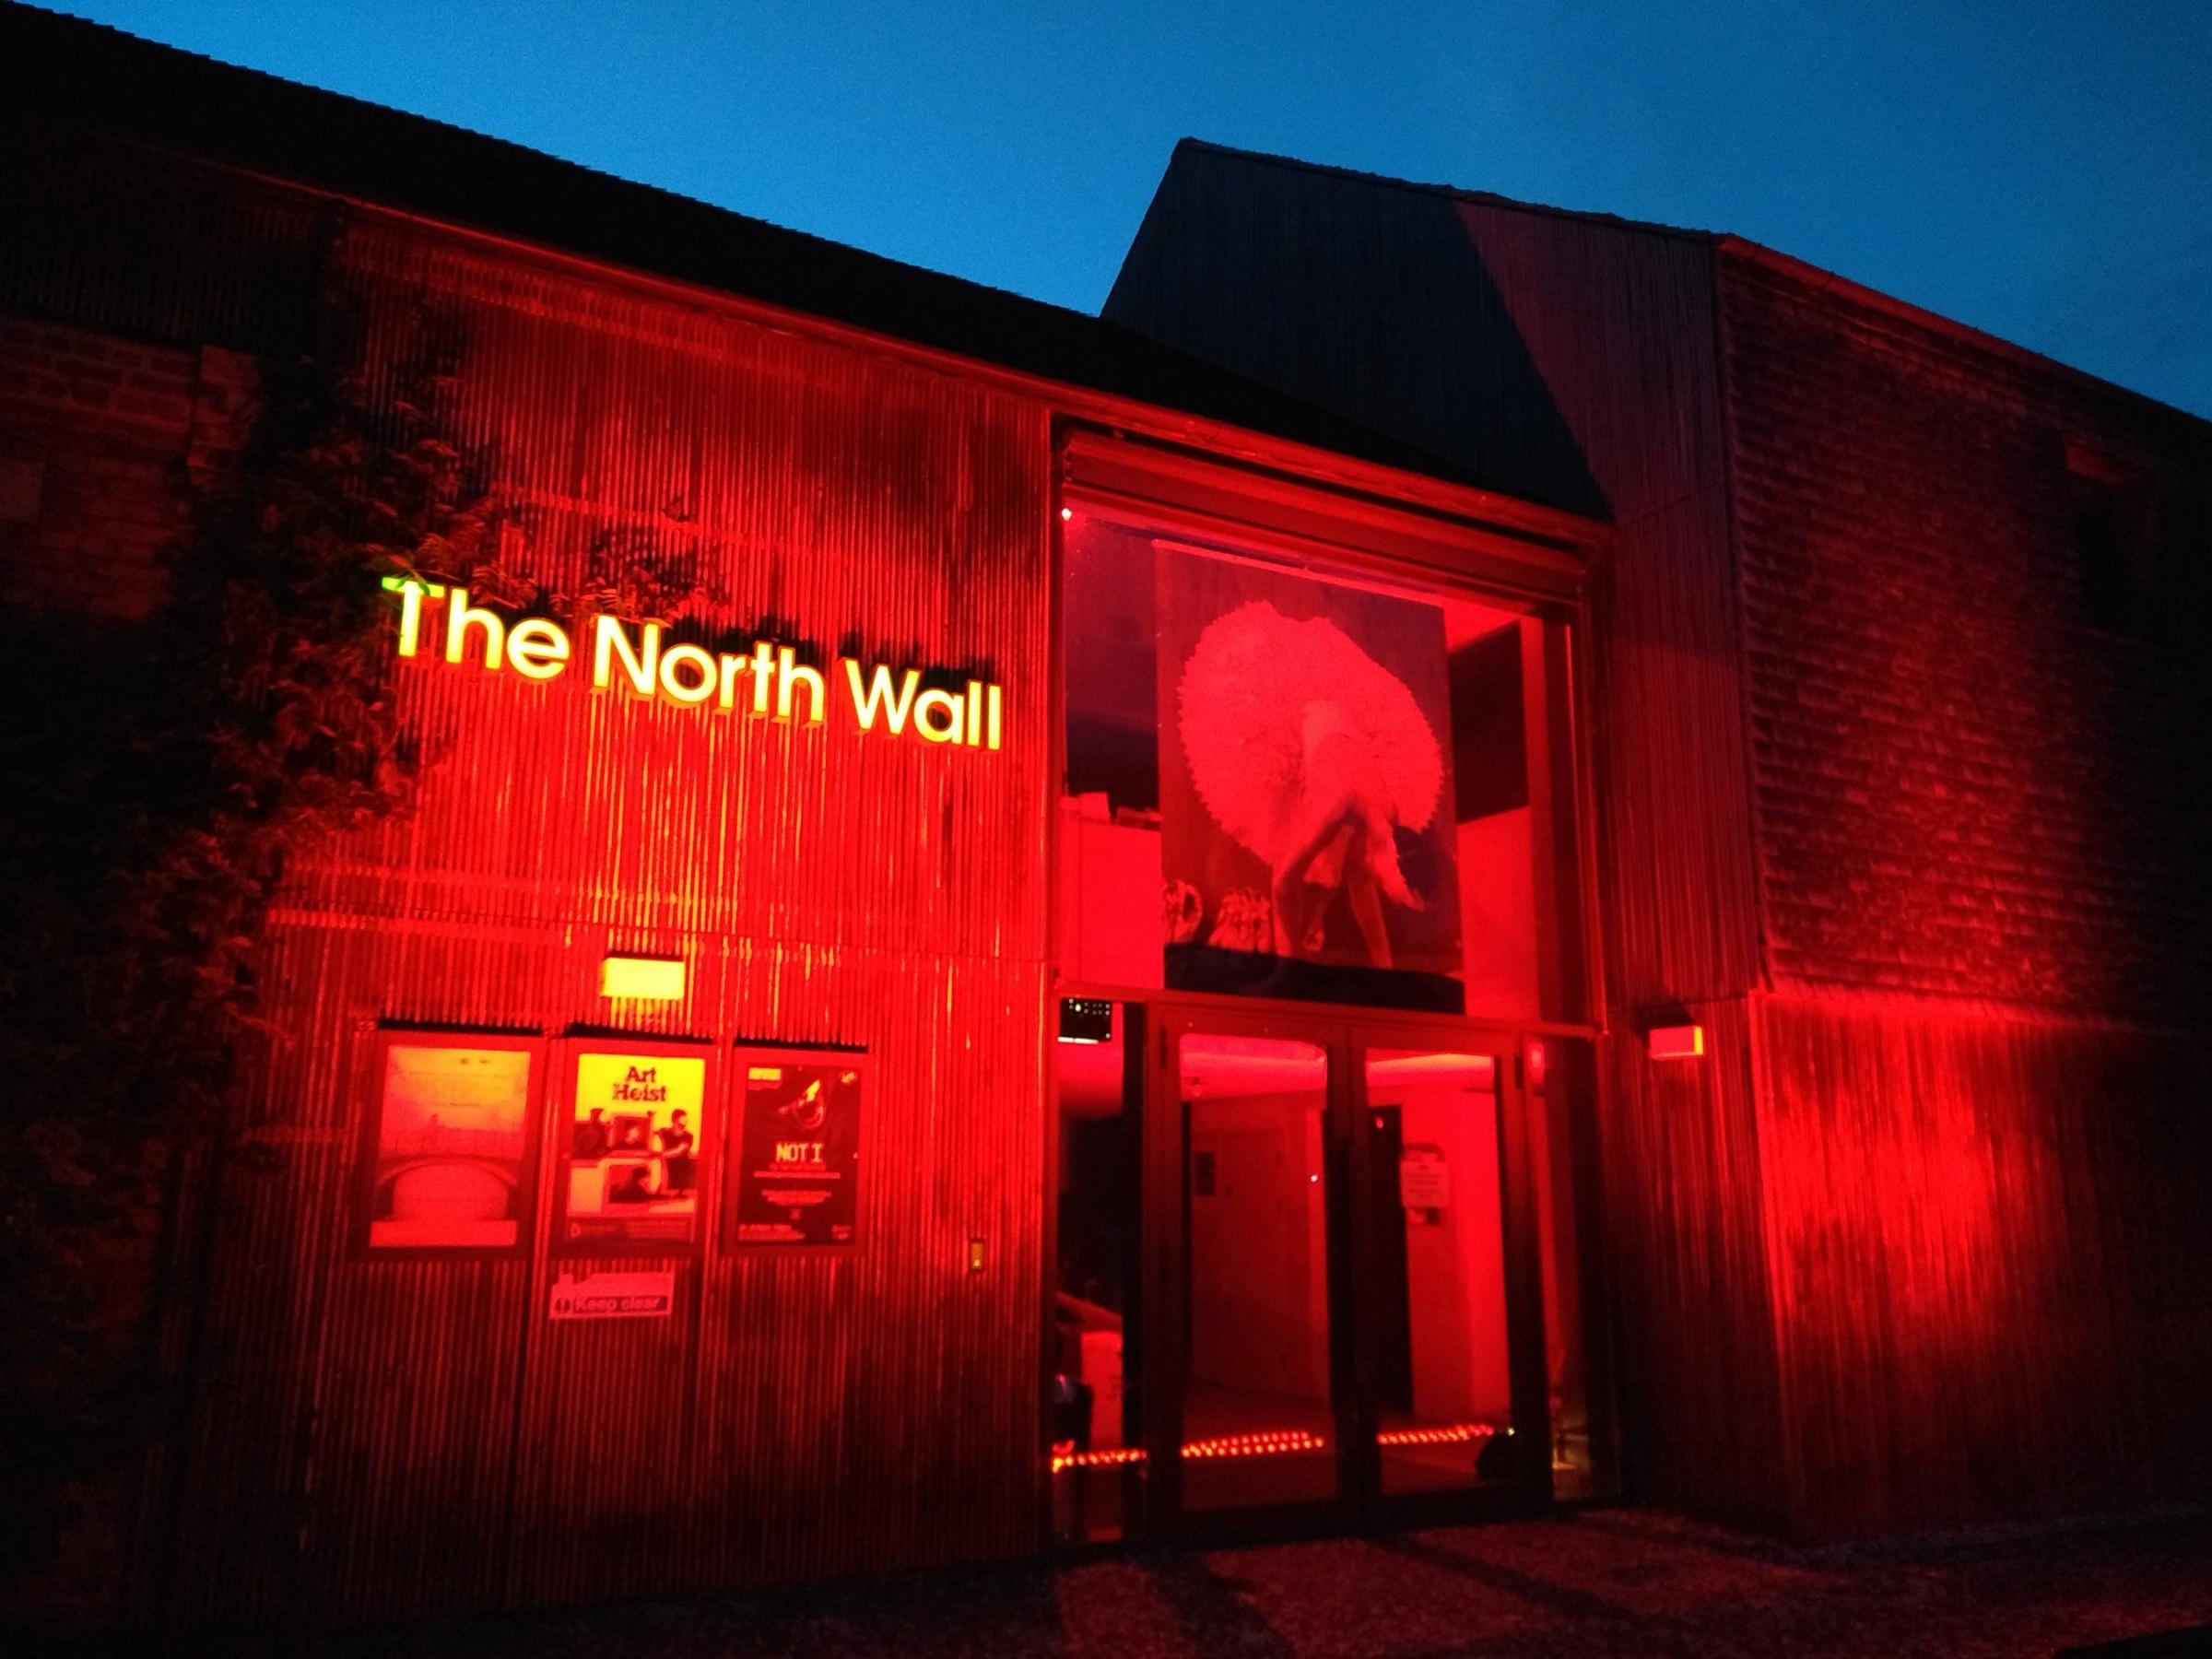 Oxfordshire theatres, such as The North Wall, lit up their buildings with red light last July to highlight the financial emergency in the sector. Many will do the same tonight